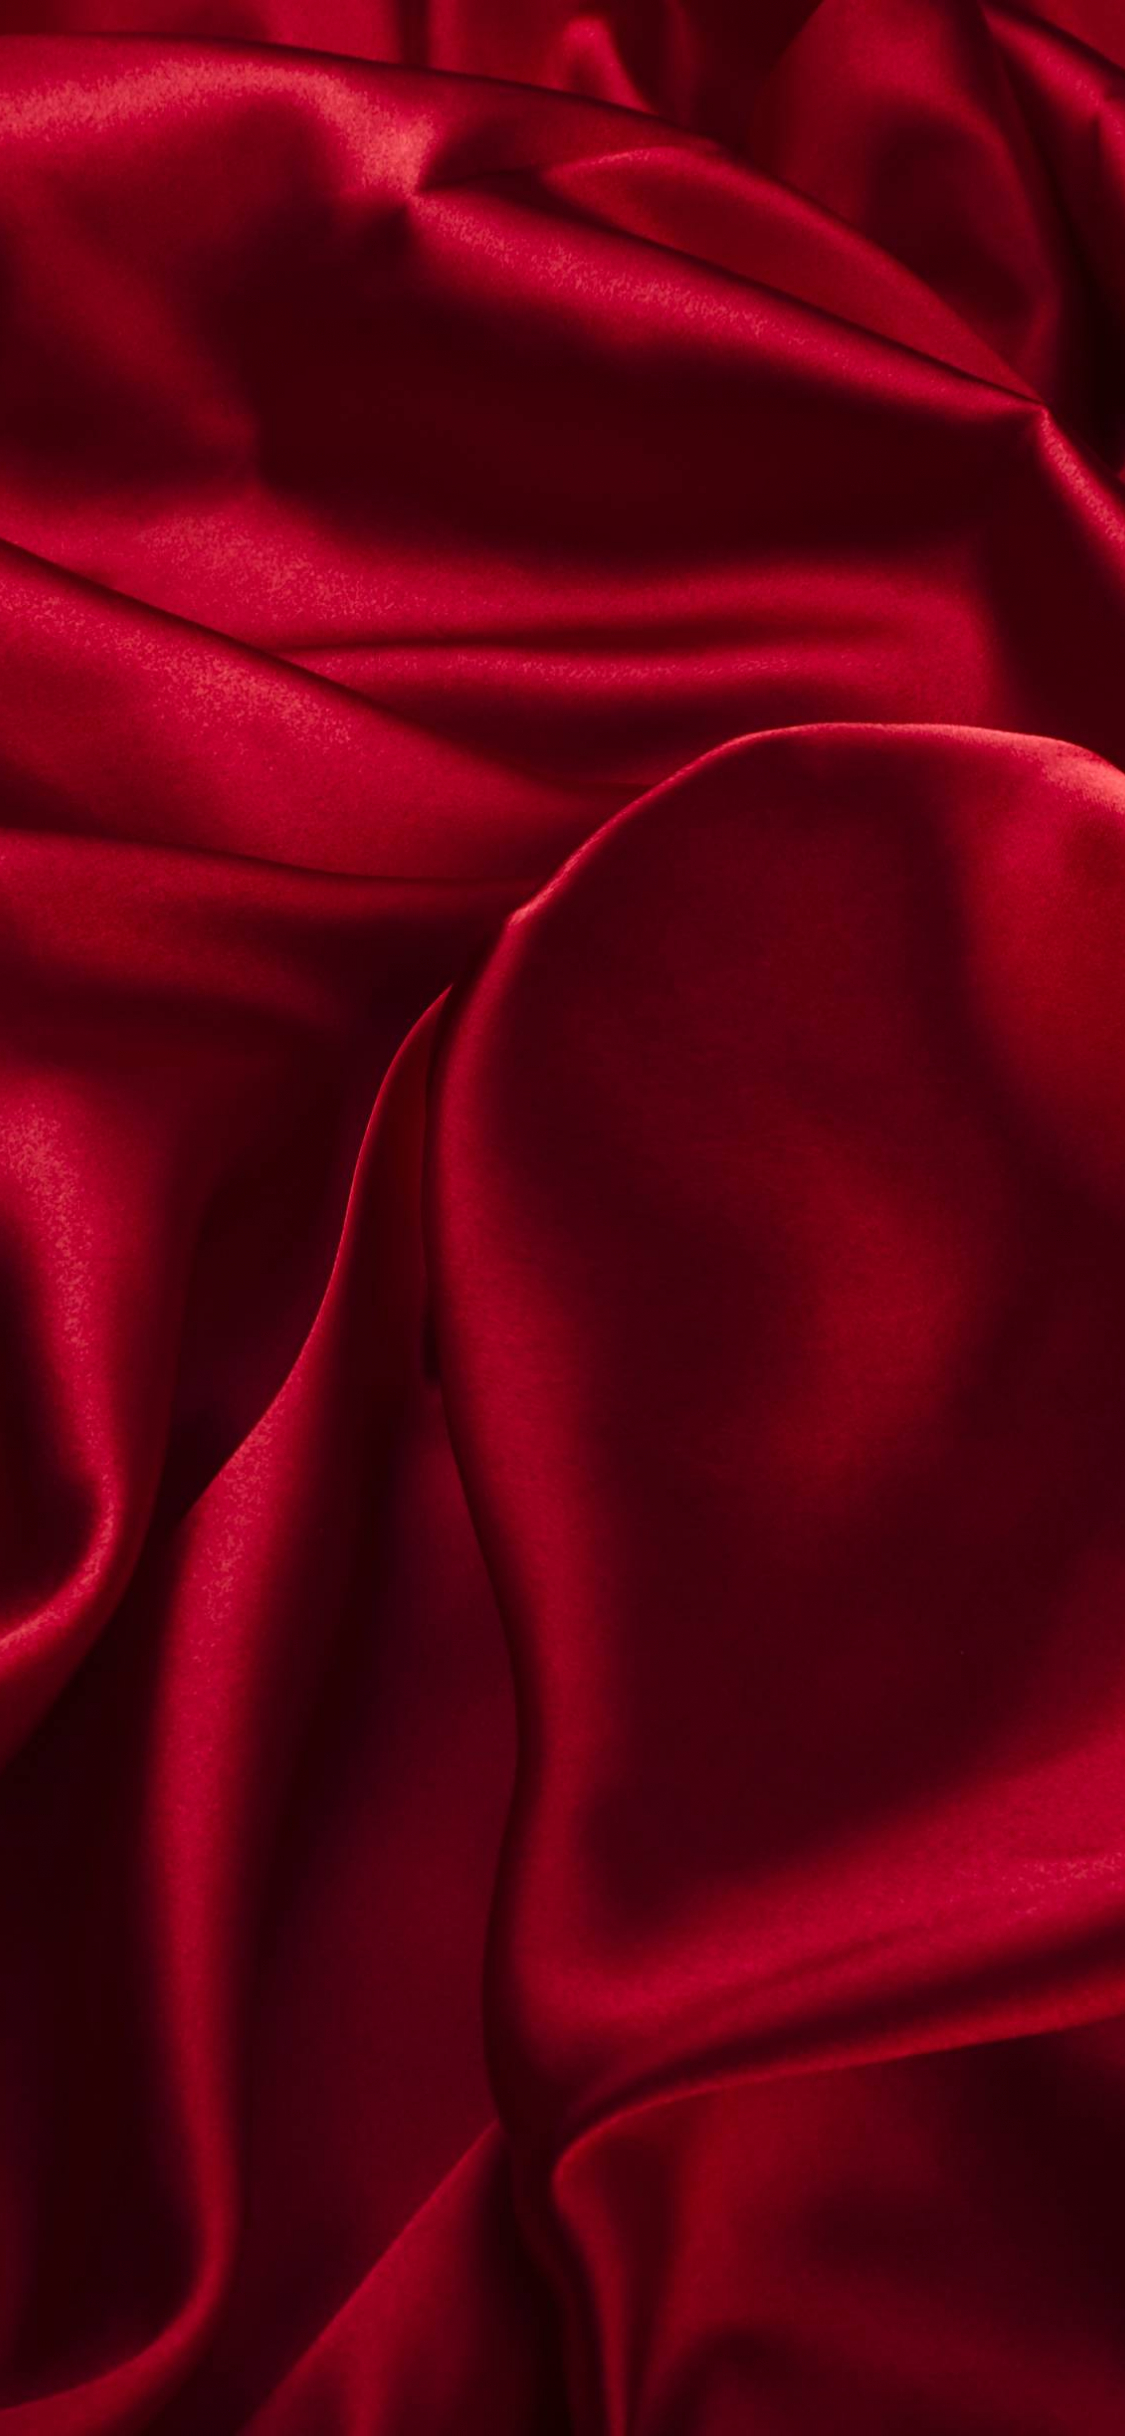 1125x2436 Free download Red Satin Wallpapers [3264x2448] for your Desktop, Mobile \u0026 Tablet | Explore 55+ Red Satin Wallpaper | White Satin Wallpaper, Blue Satin Wallpaper, Silk and Satin Wallpaper